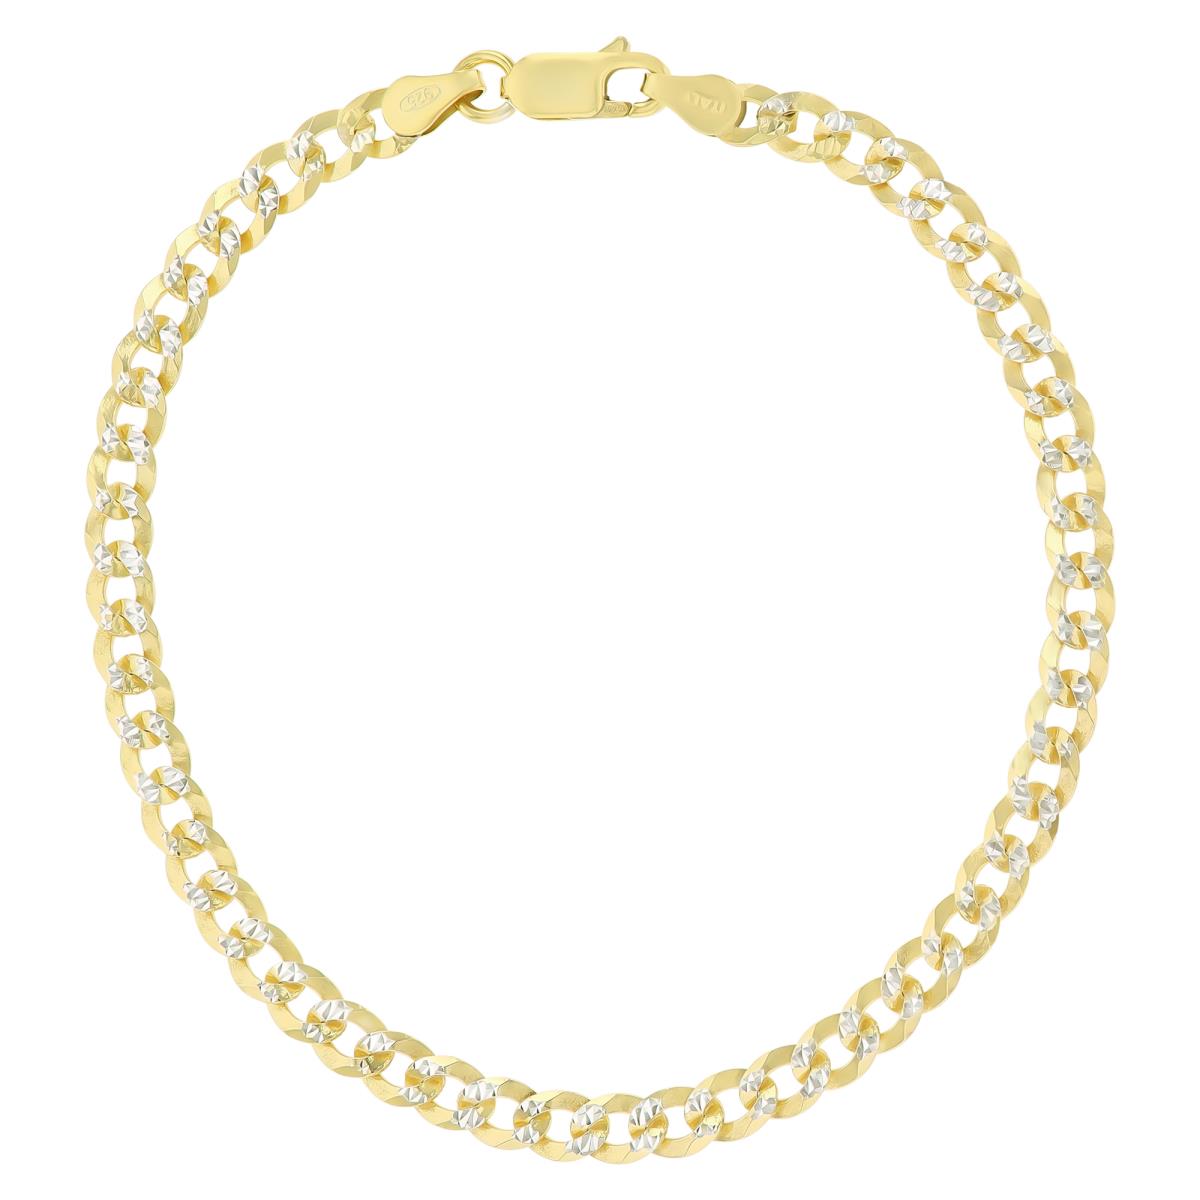 Sterling Silver Two-Tone DC 4.5mm 120 Curb Pave 10"Chain Bracelet